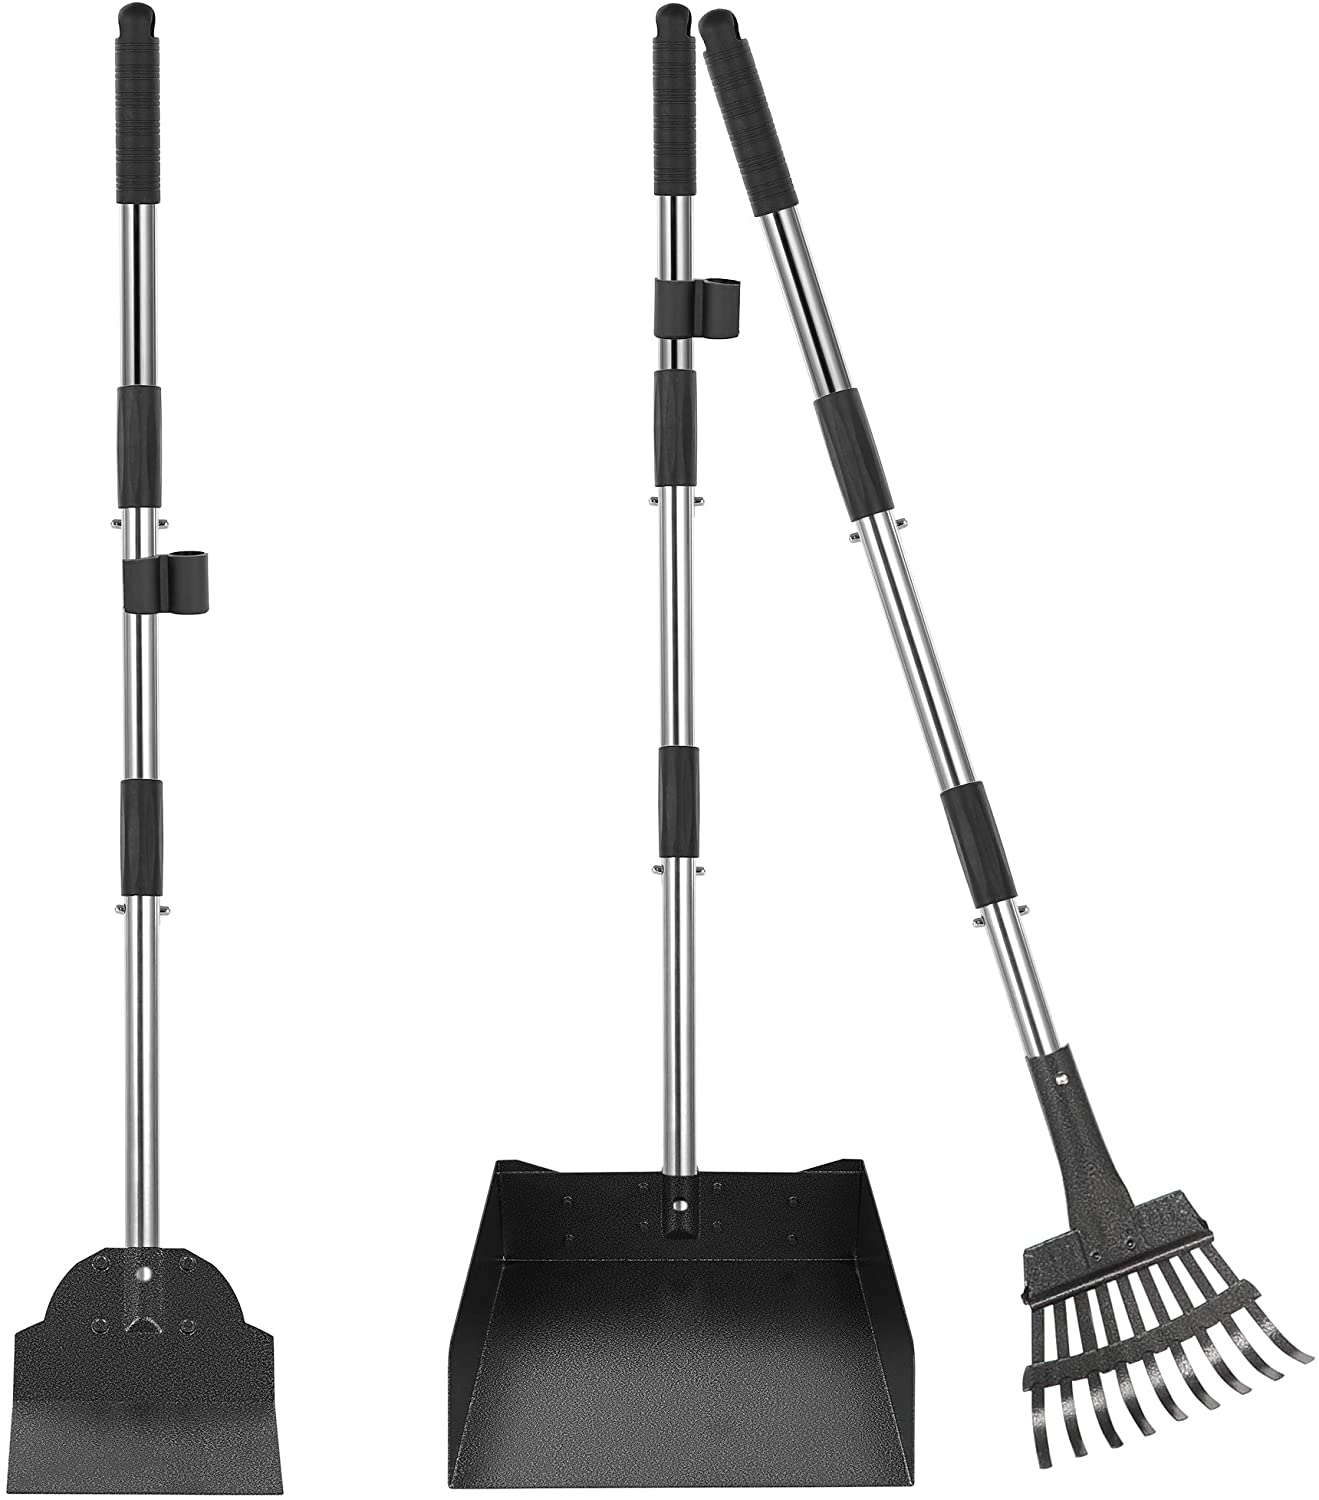 FEANDREA Big Pooper Scooper, for Large, Small Dogs, 3-Piece Rake Tray and Spade Set, Easy to Clean, Adjustable Long Handle, Steel, for Pets Lawn Grass Dirt Gravel, Black and Silver UPPP102B01